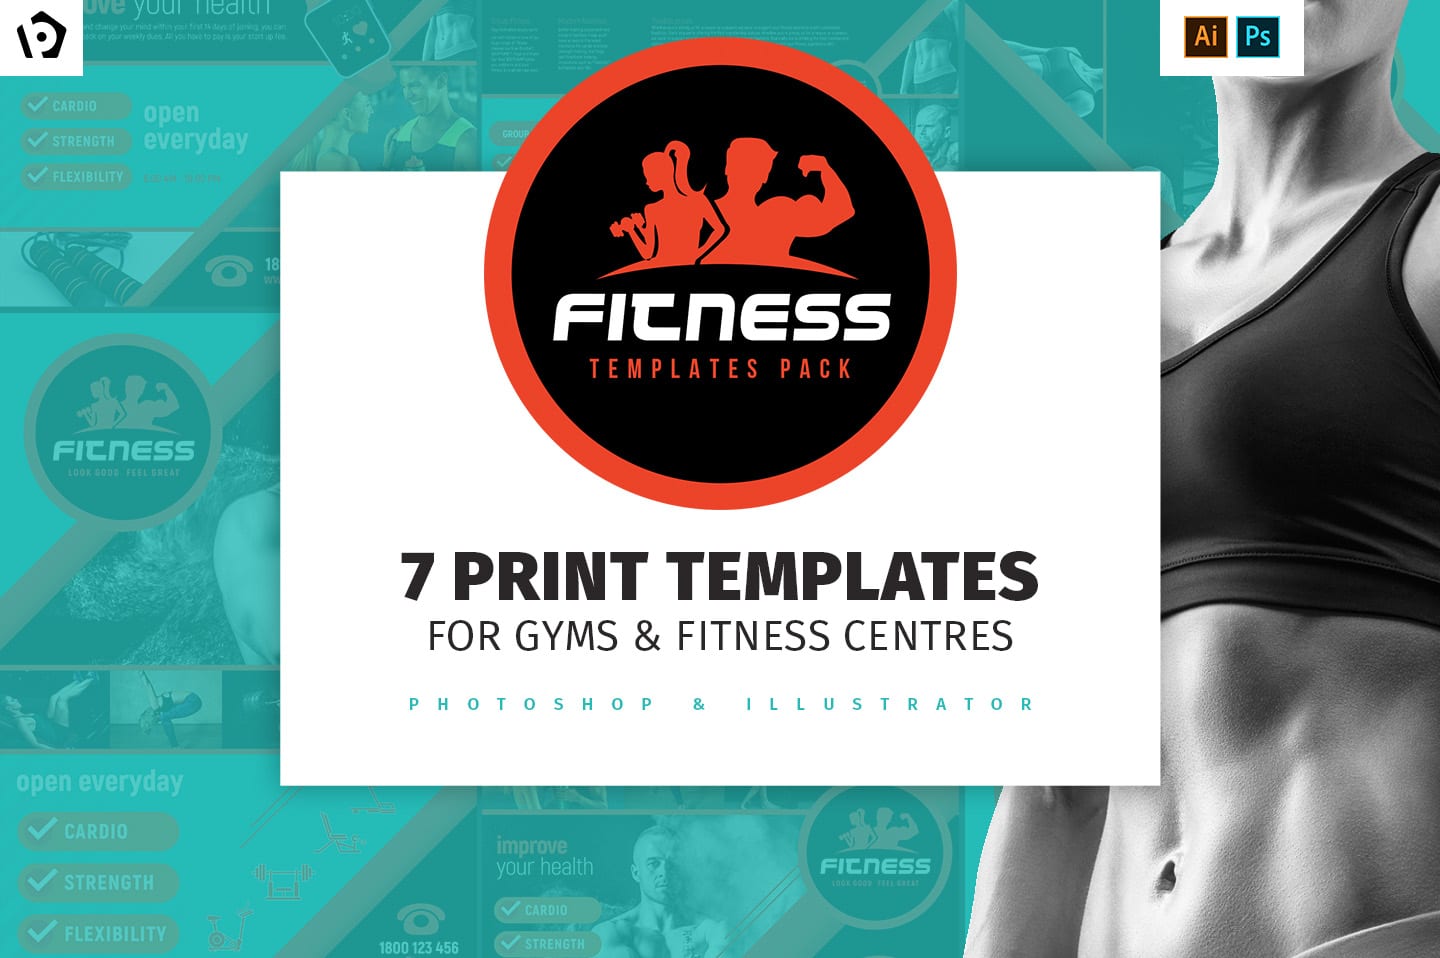 Gym / Fitness Templates Pack